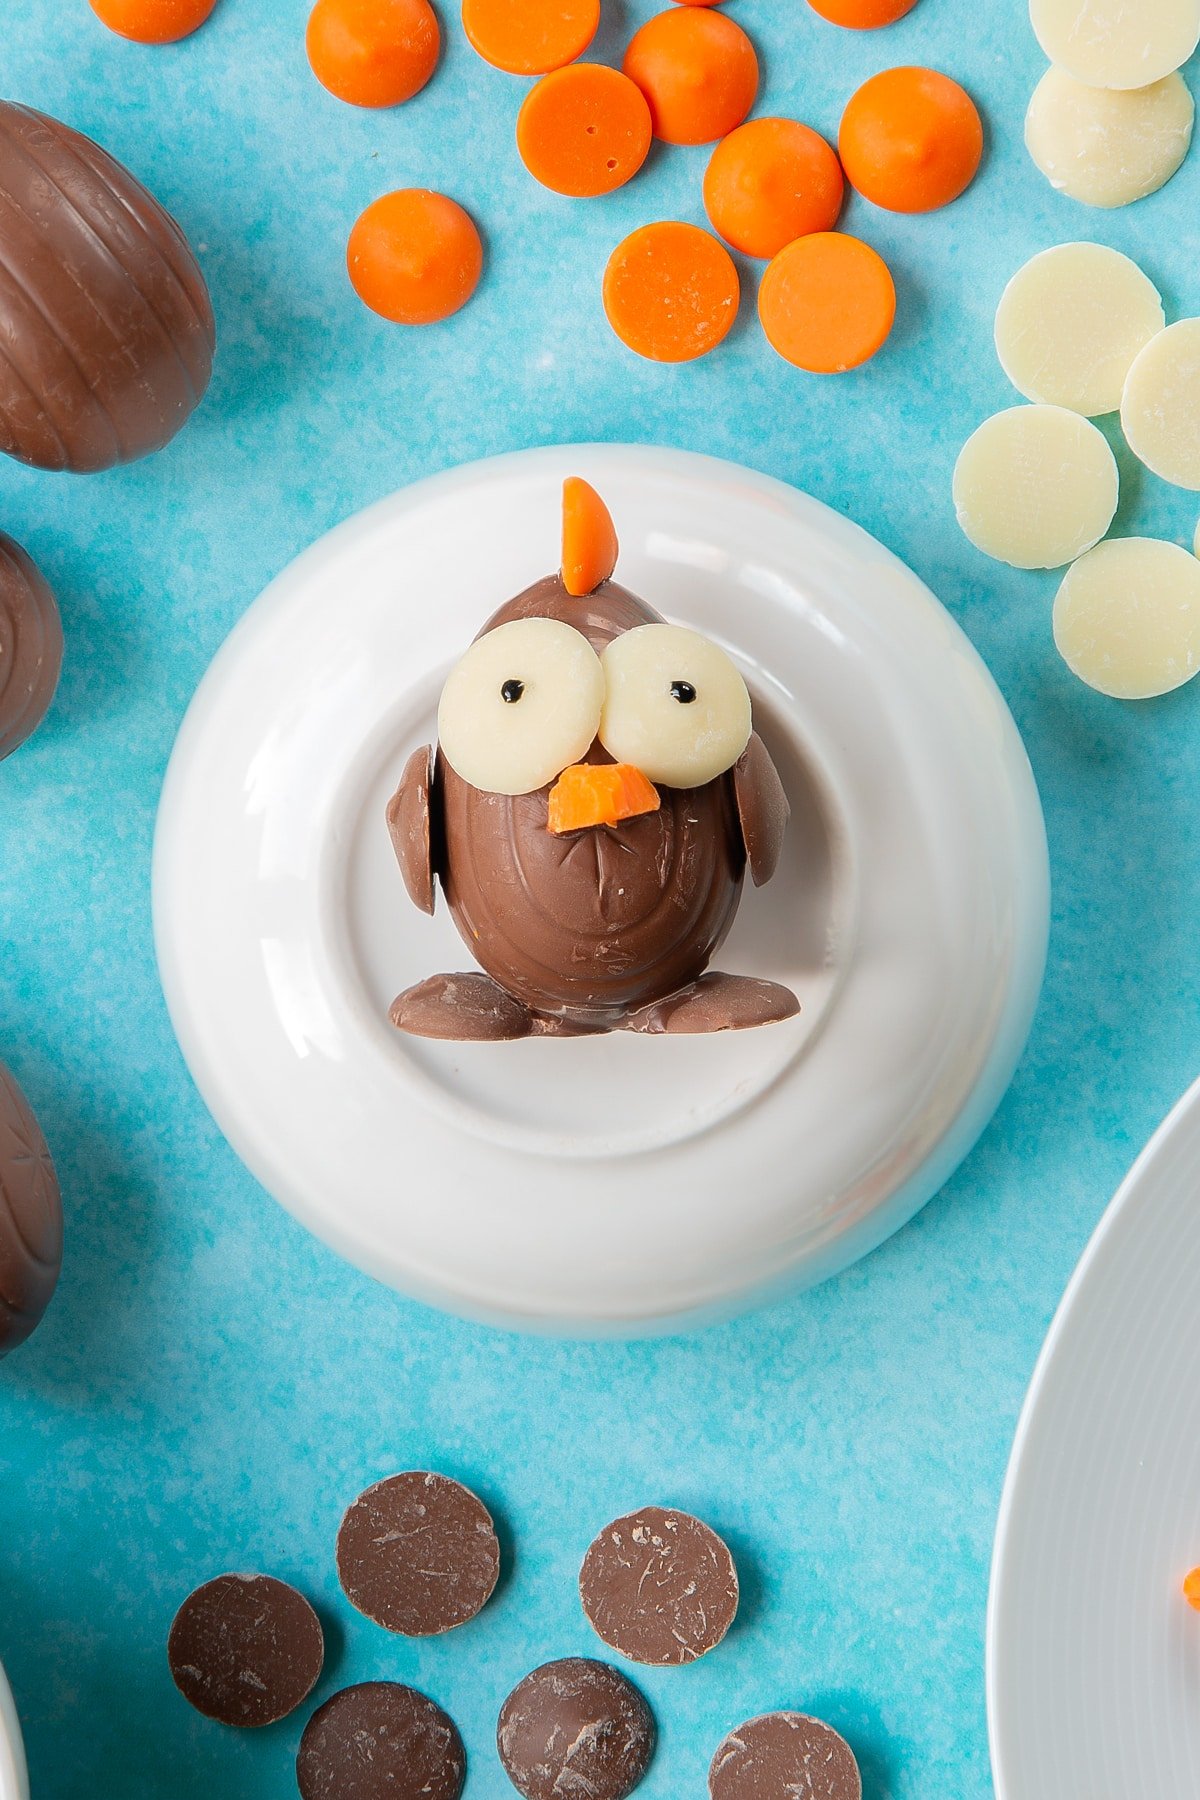 A creme egg is decorated with chocolate buttons to resemble an Easter chick. Half an orange button is stuck to the top to resemble a crest. The chick rests on a bowl, surrounded by ingredients to make chocolate chicks.